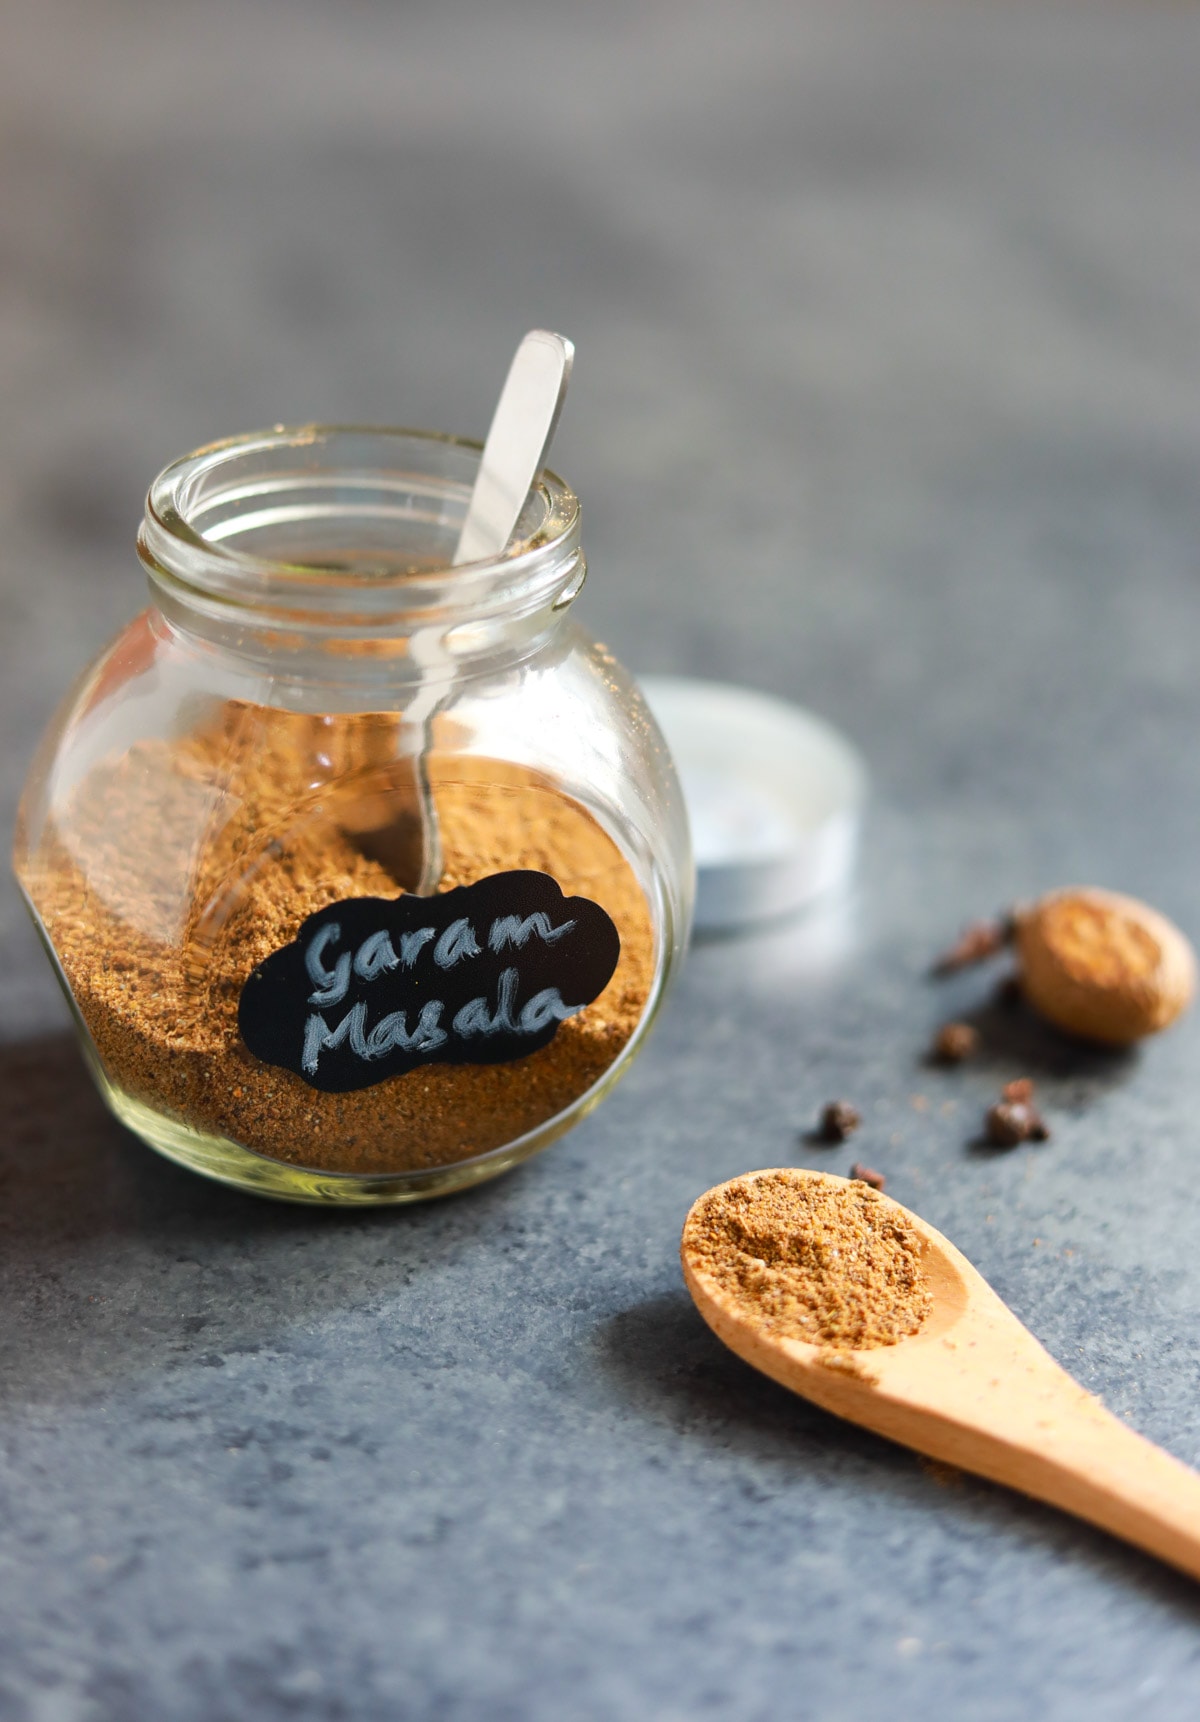 North Indian Garam masala in a glass jar and in a spoon.